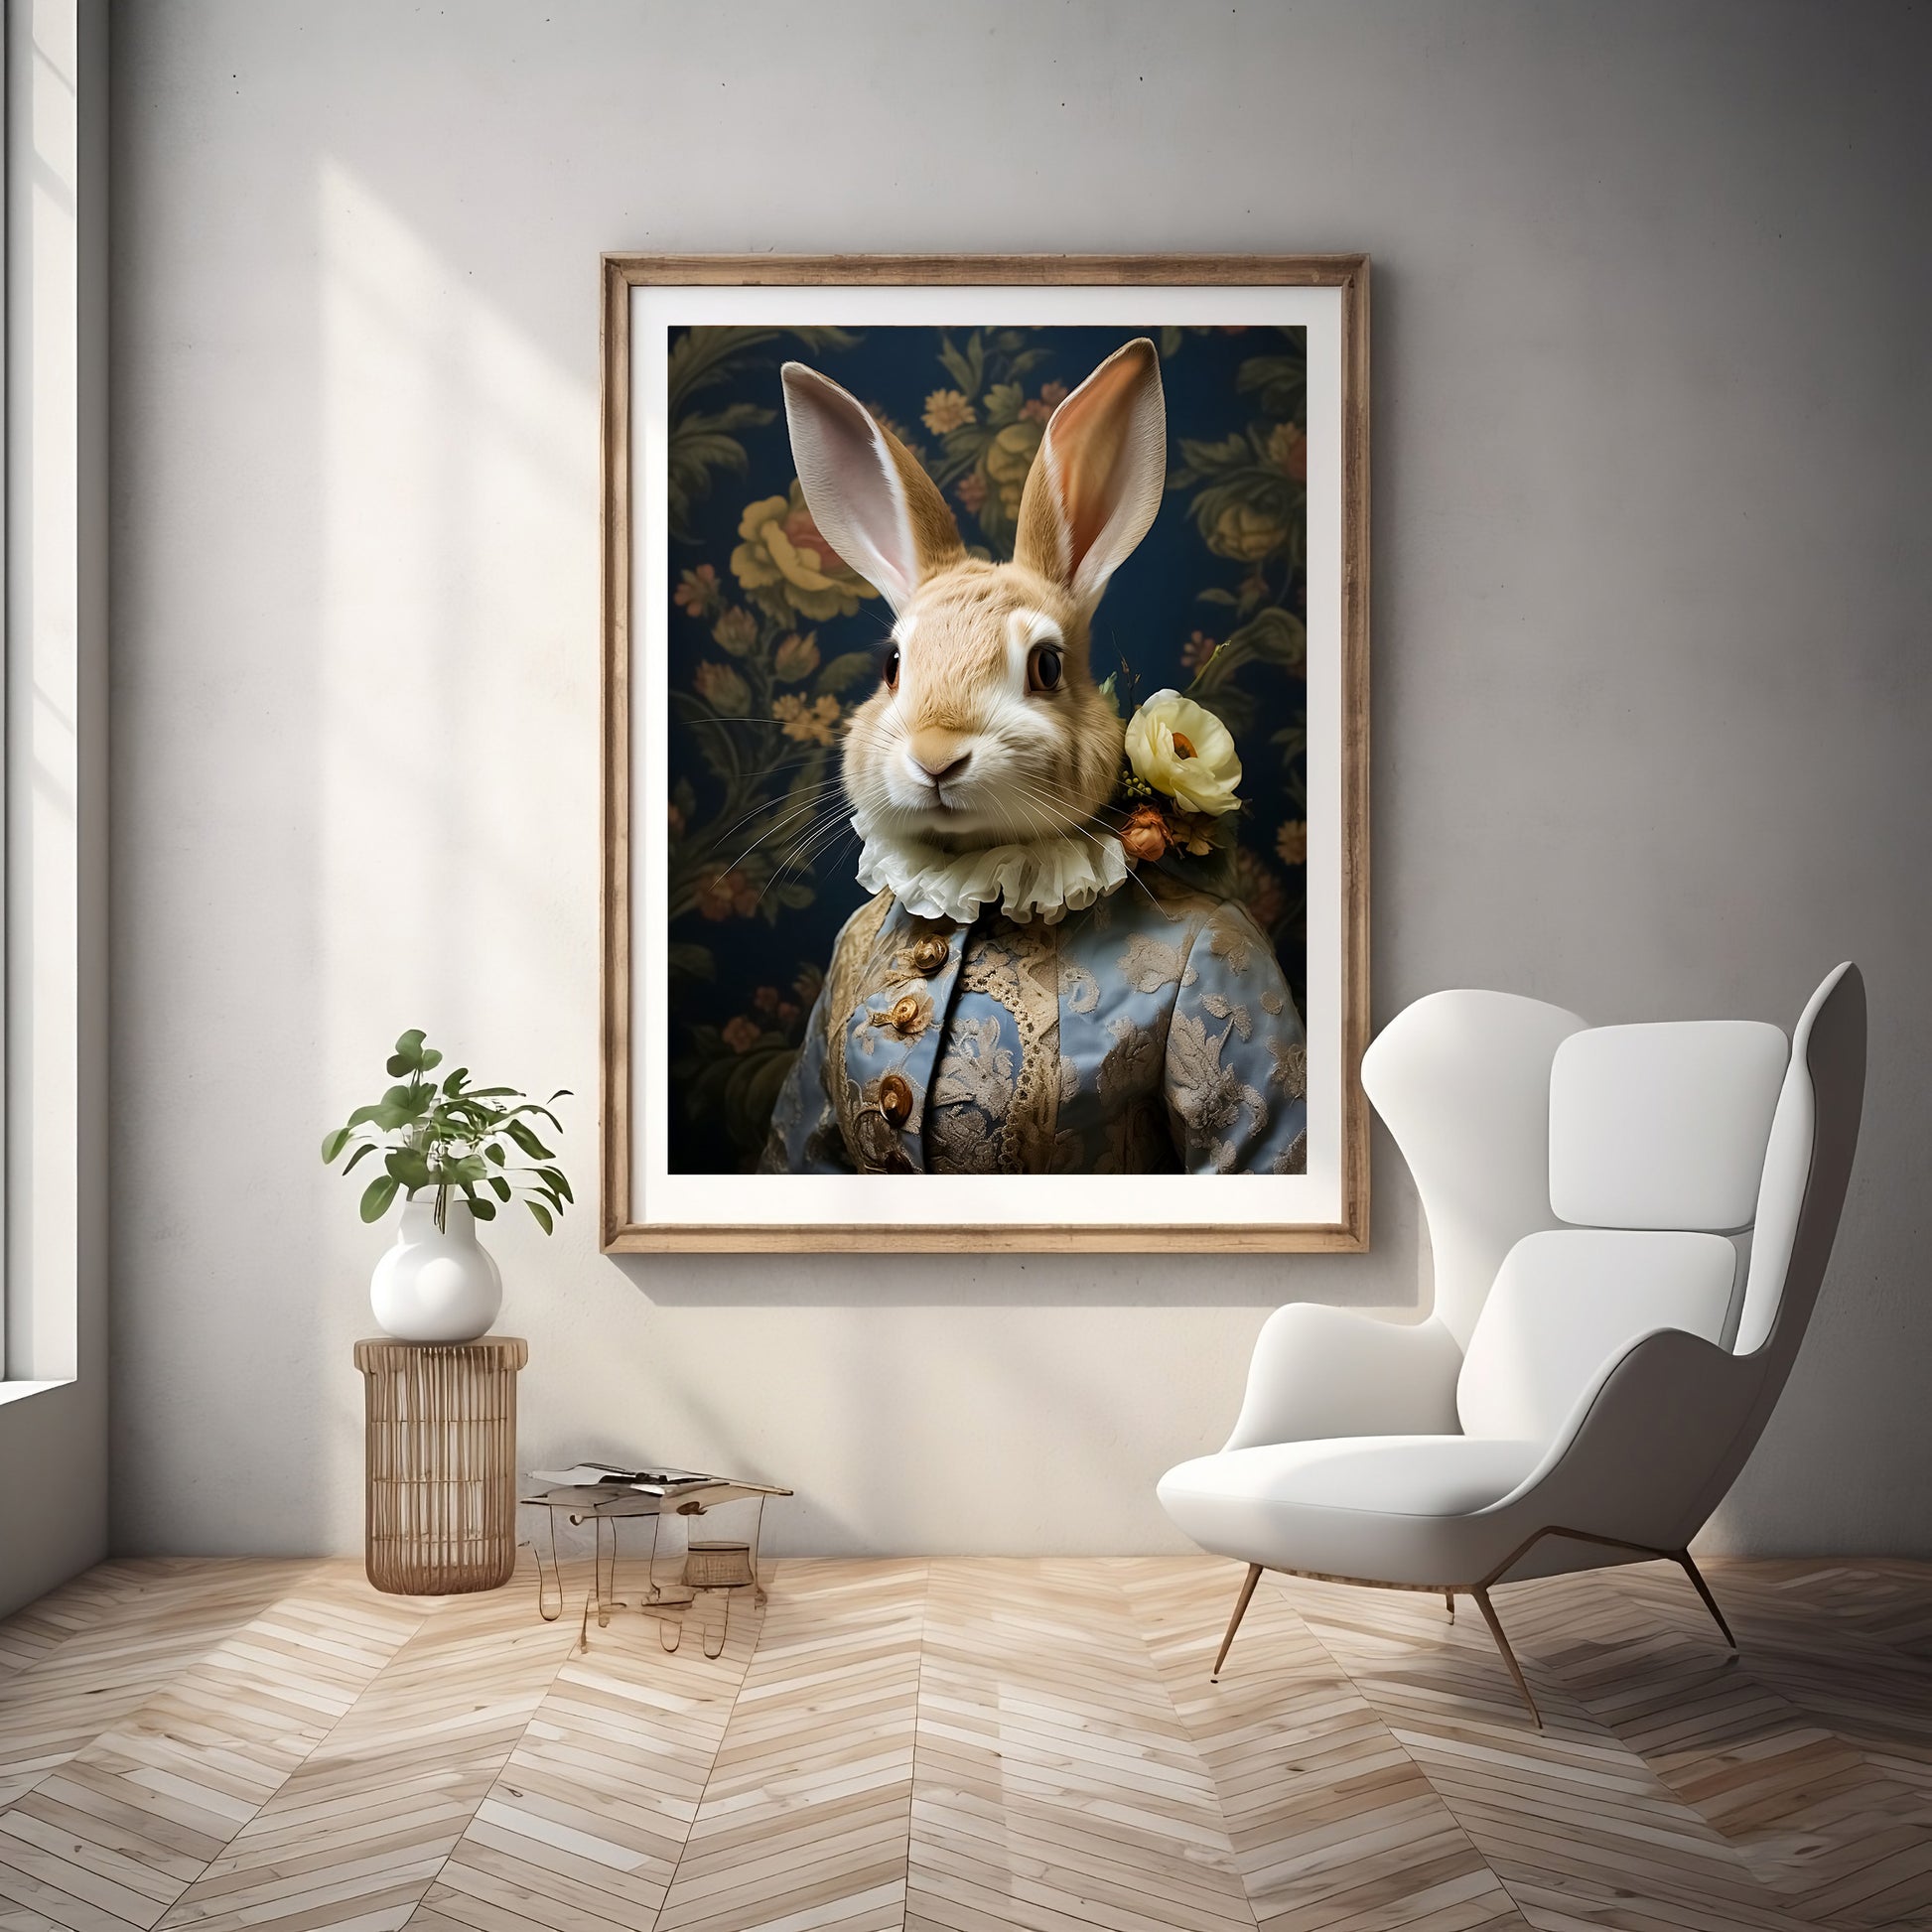 Victorian Bunny Portrait | Renaissance Animals Art Print | Rabbit with Ruffles from The Curated Goose